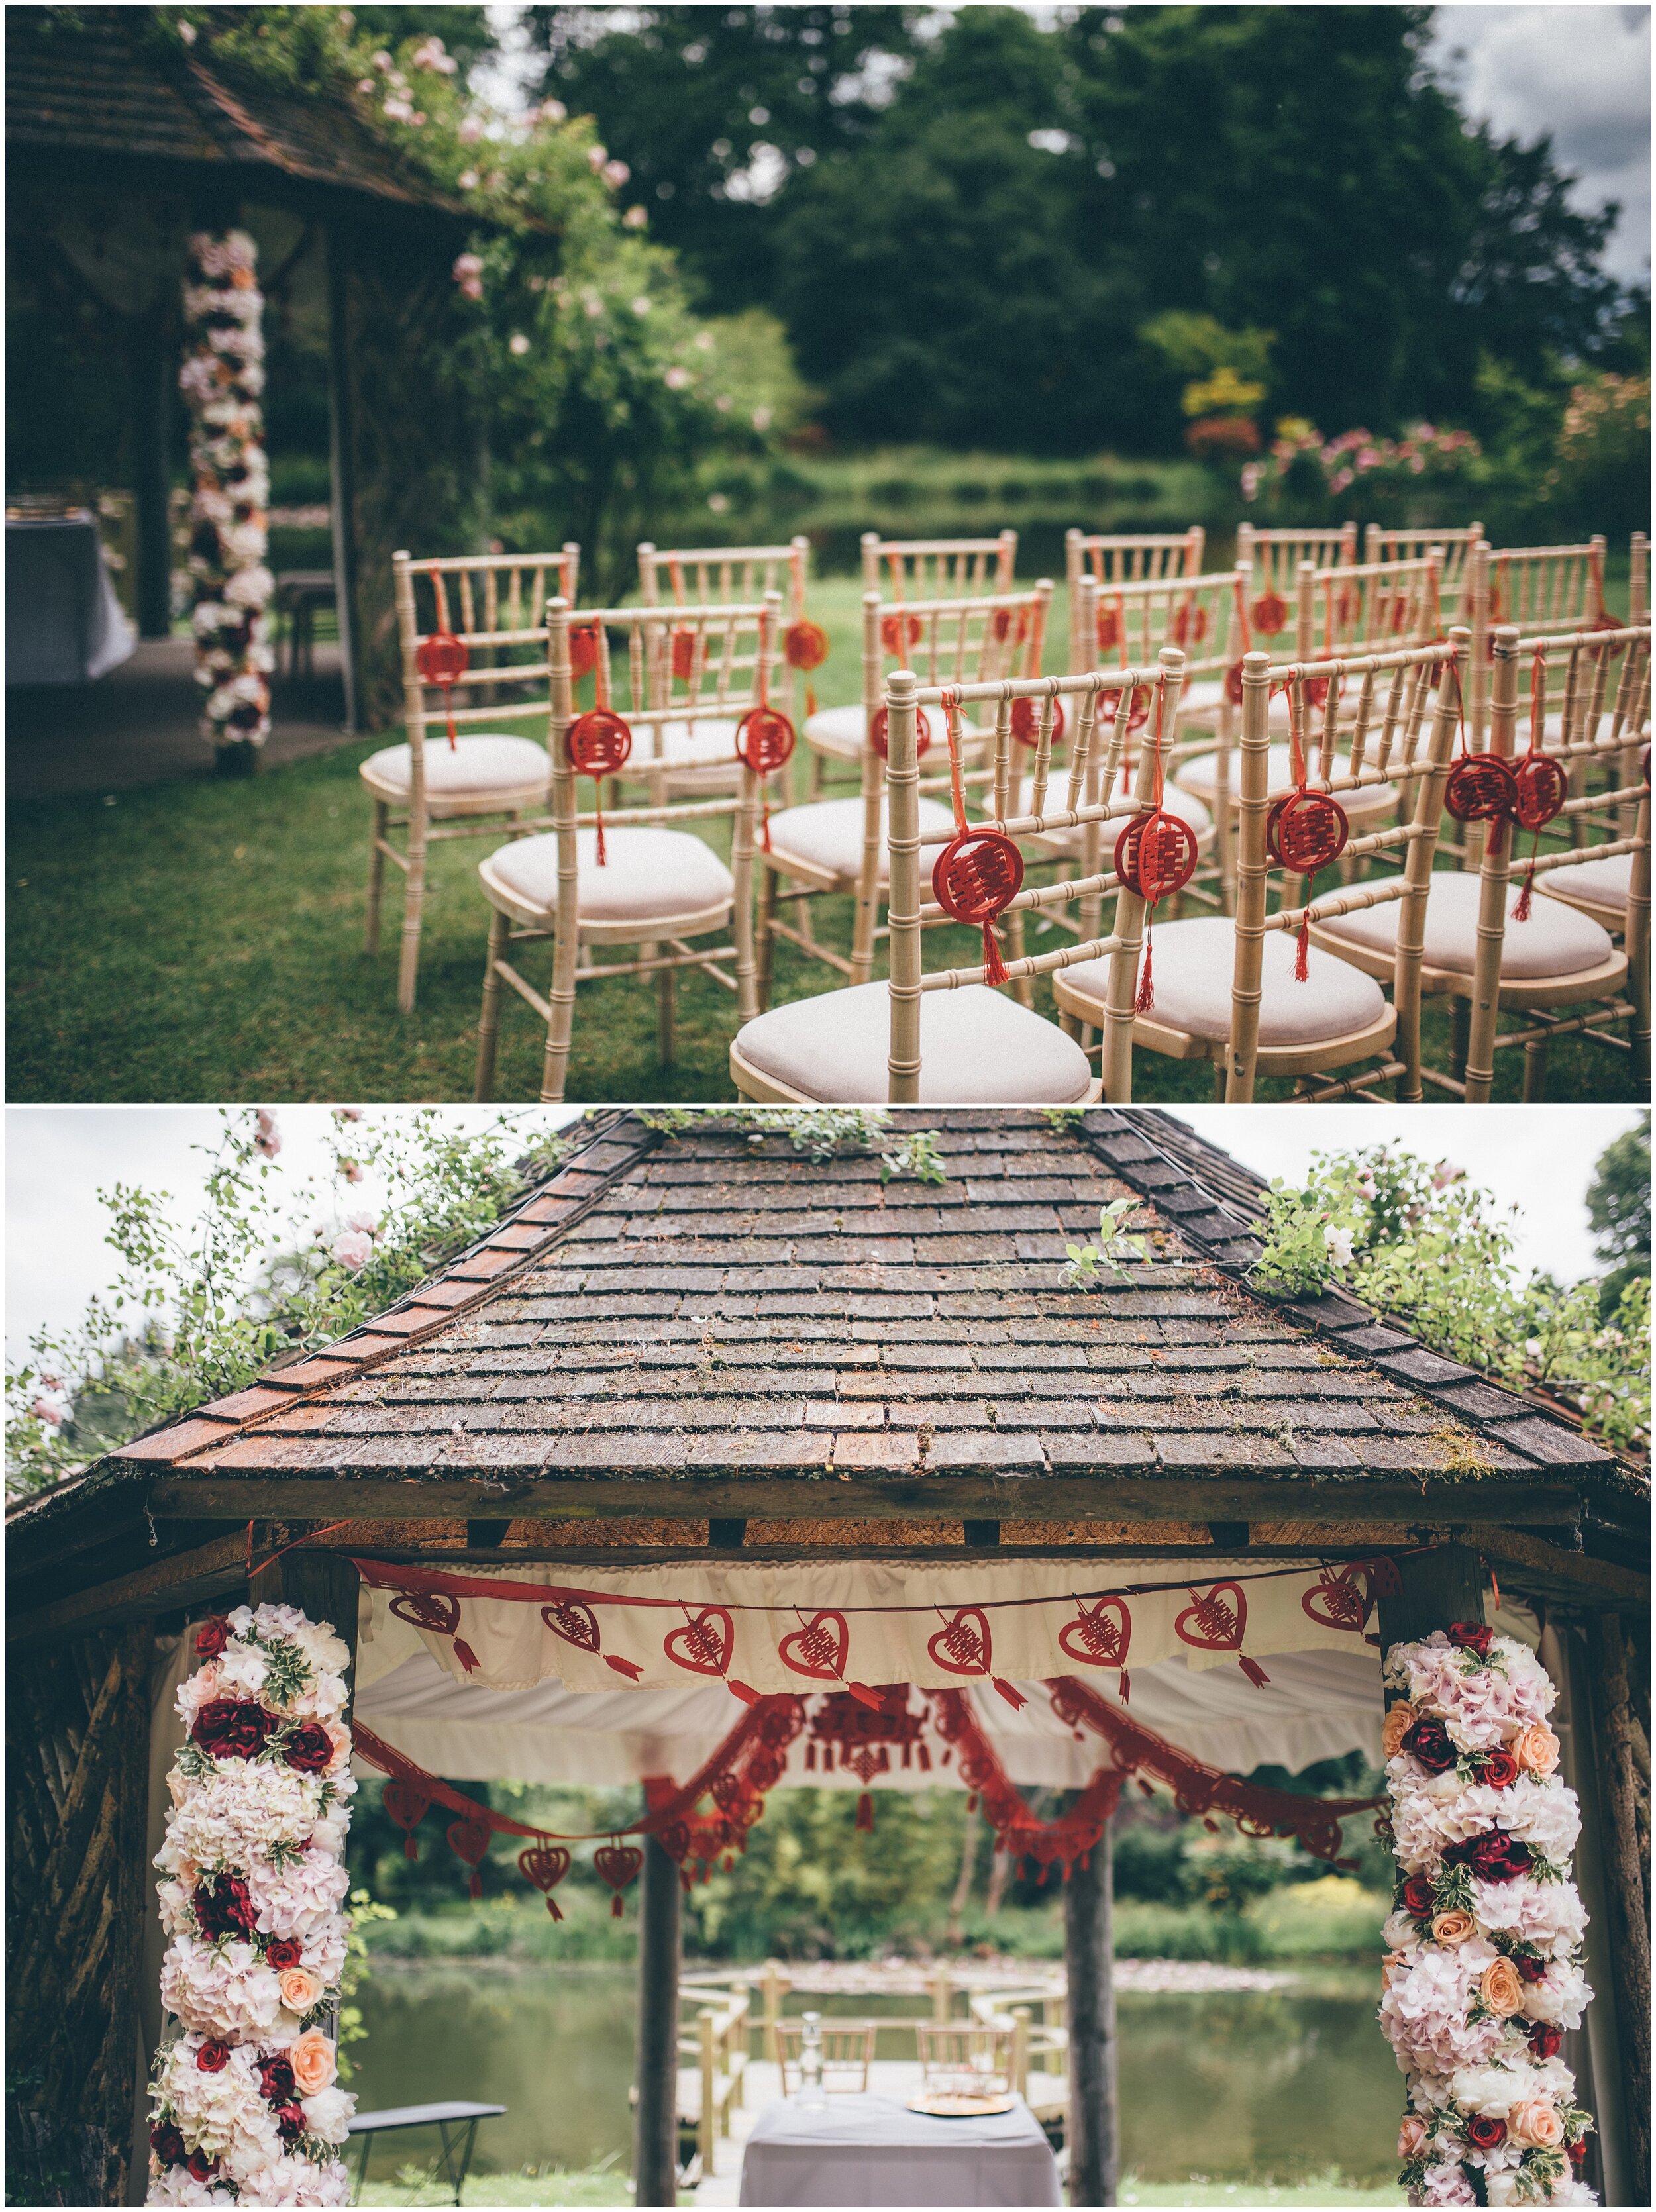 Chinese themed outdoor ceremony at Chippenham Park Gardens.